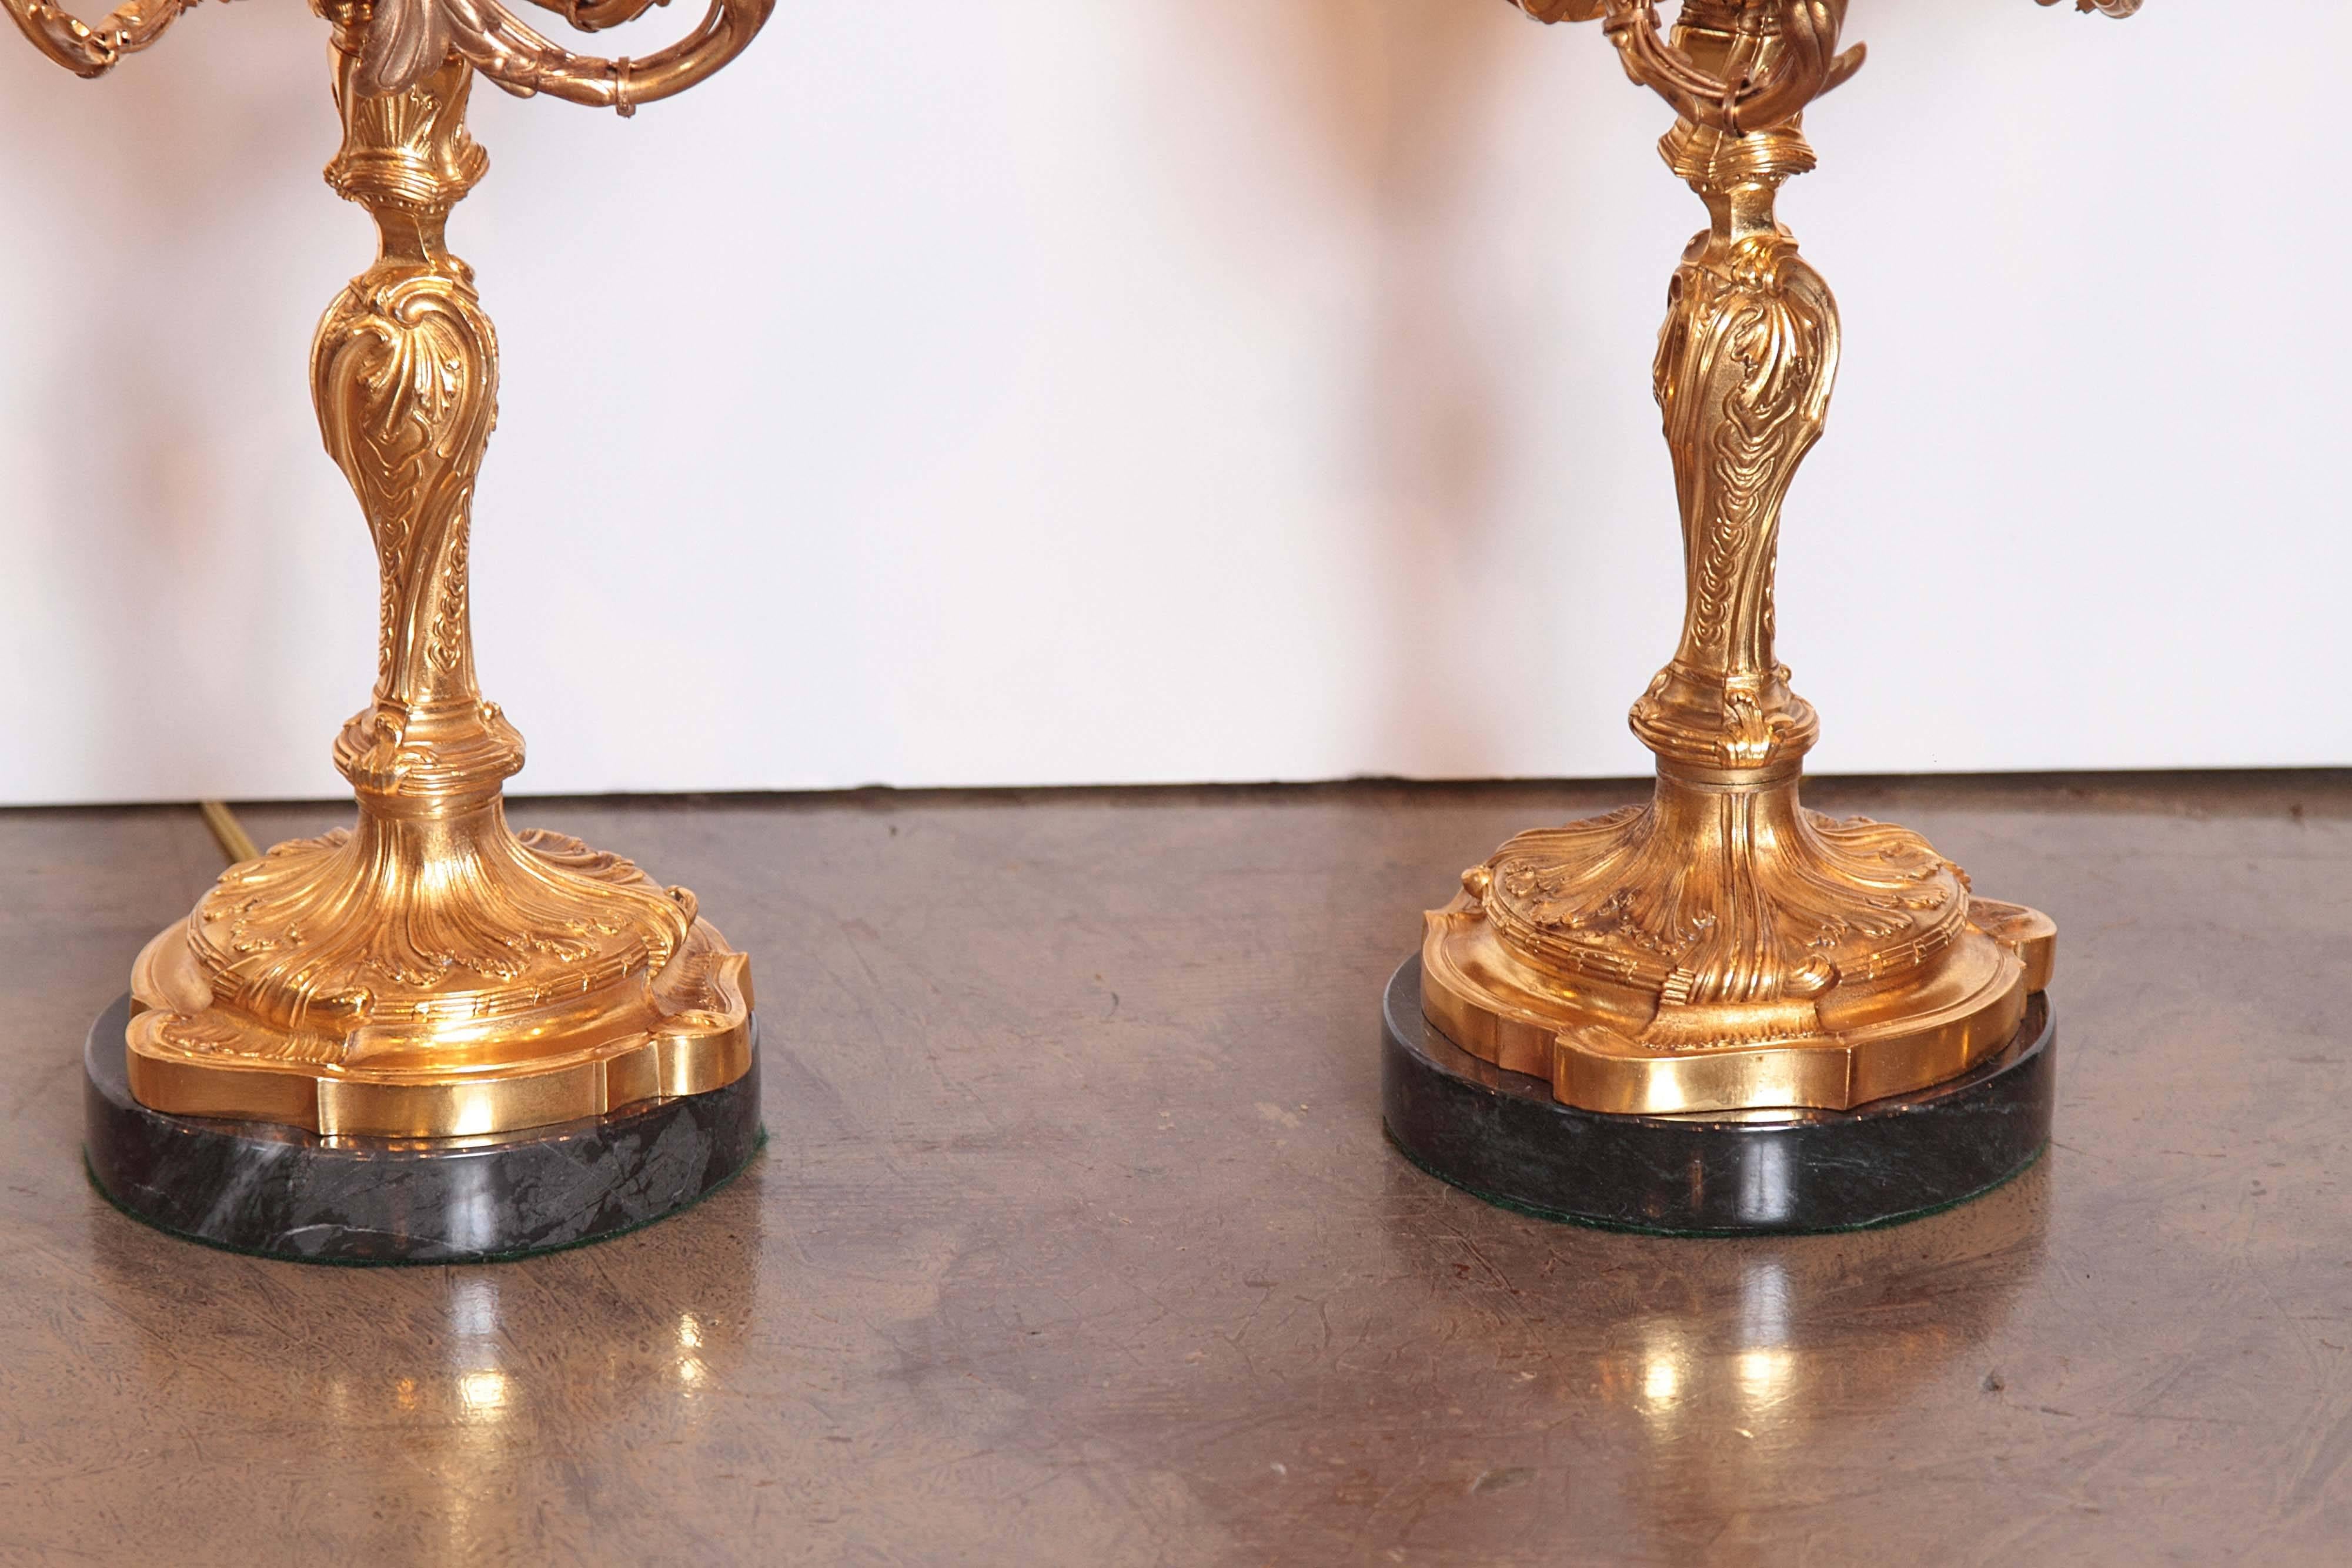 French Pair of 19th Century Gilt Bronze Candelabra Lamps Signed Henry Dasson, 1882